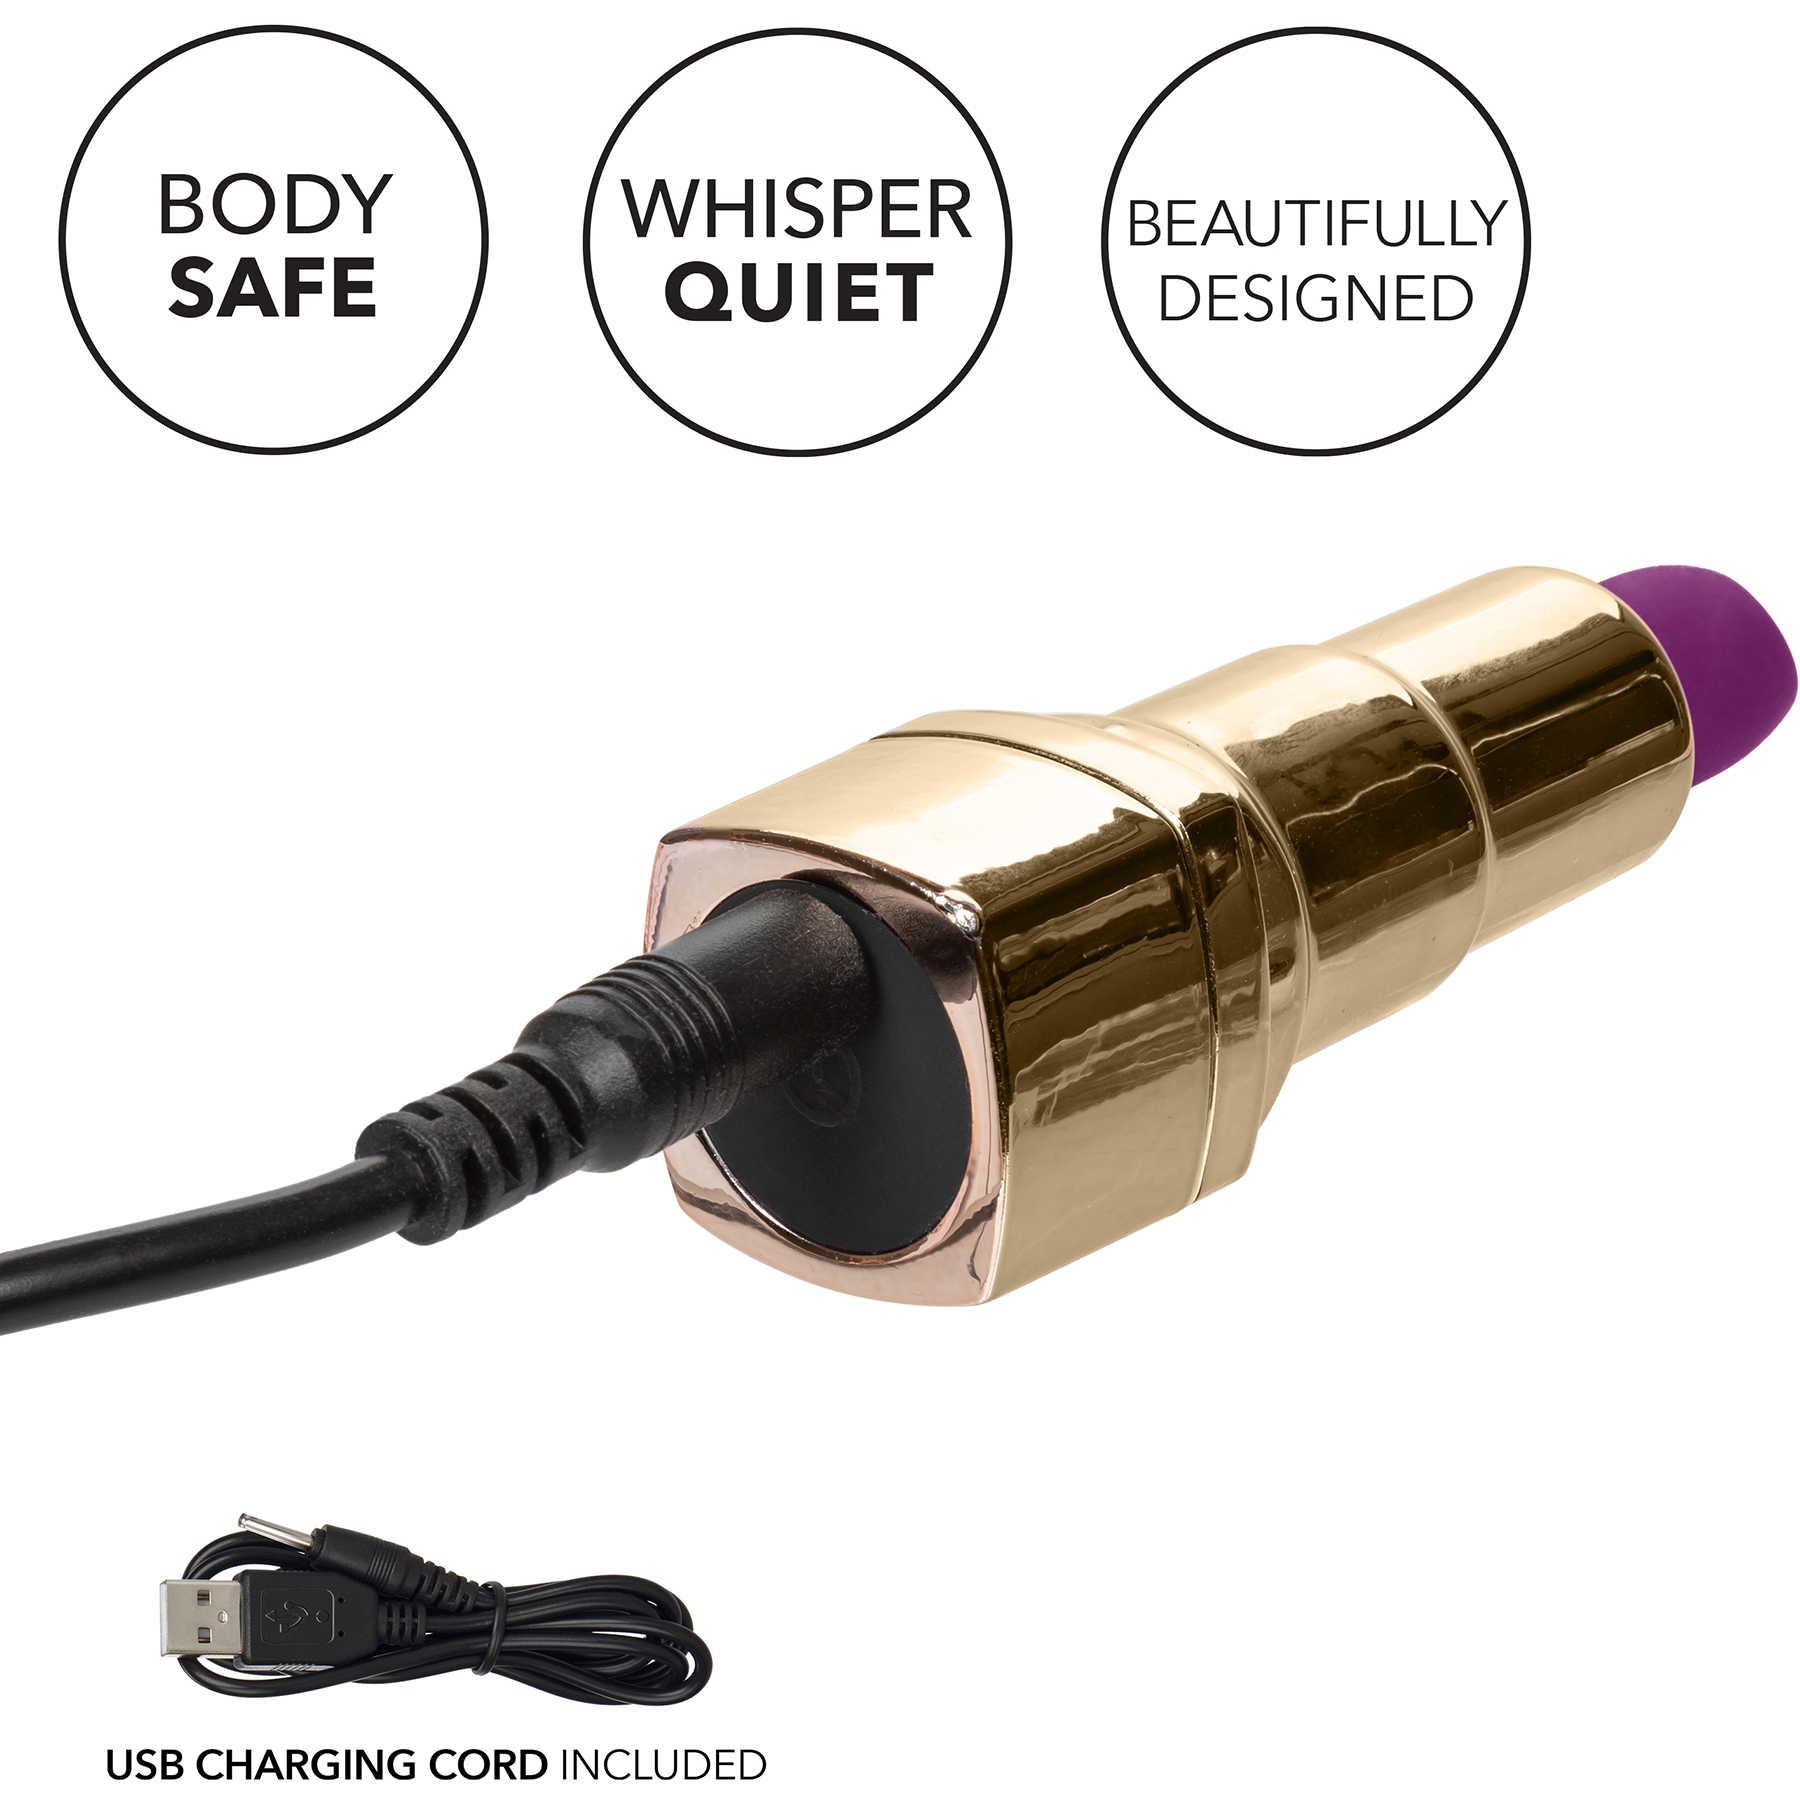 Naughty Bits Bad Bitch Waterproof Rechargeable Lipstick Vibrator - Features